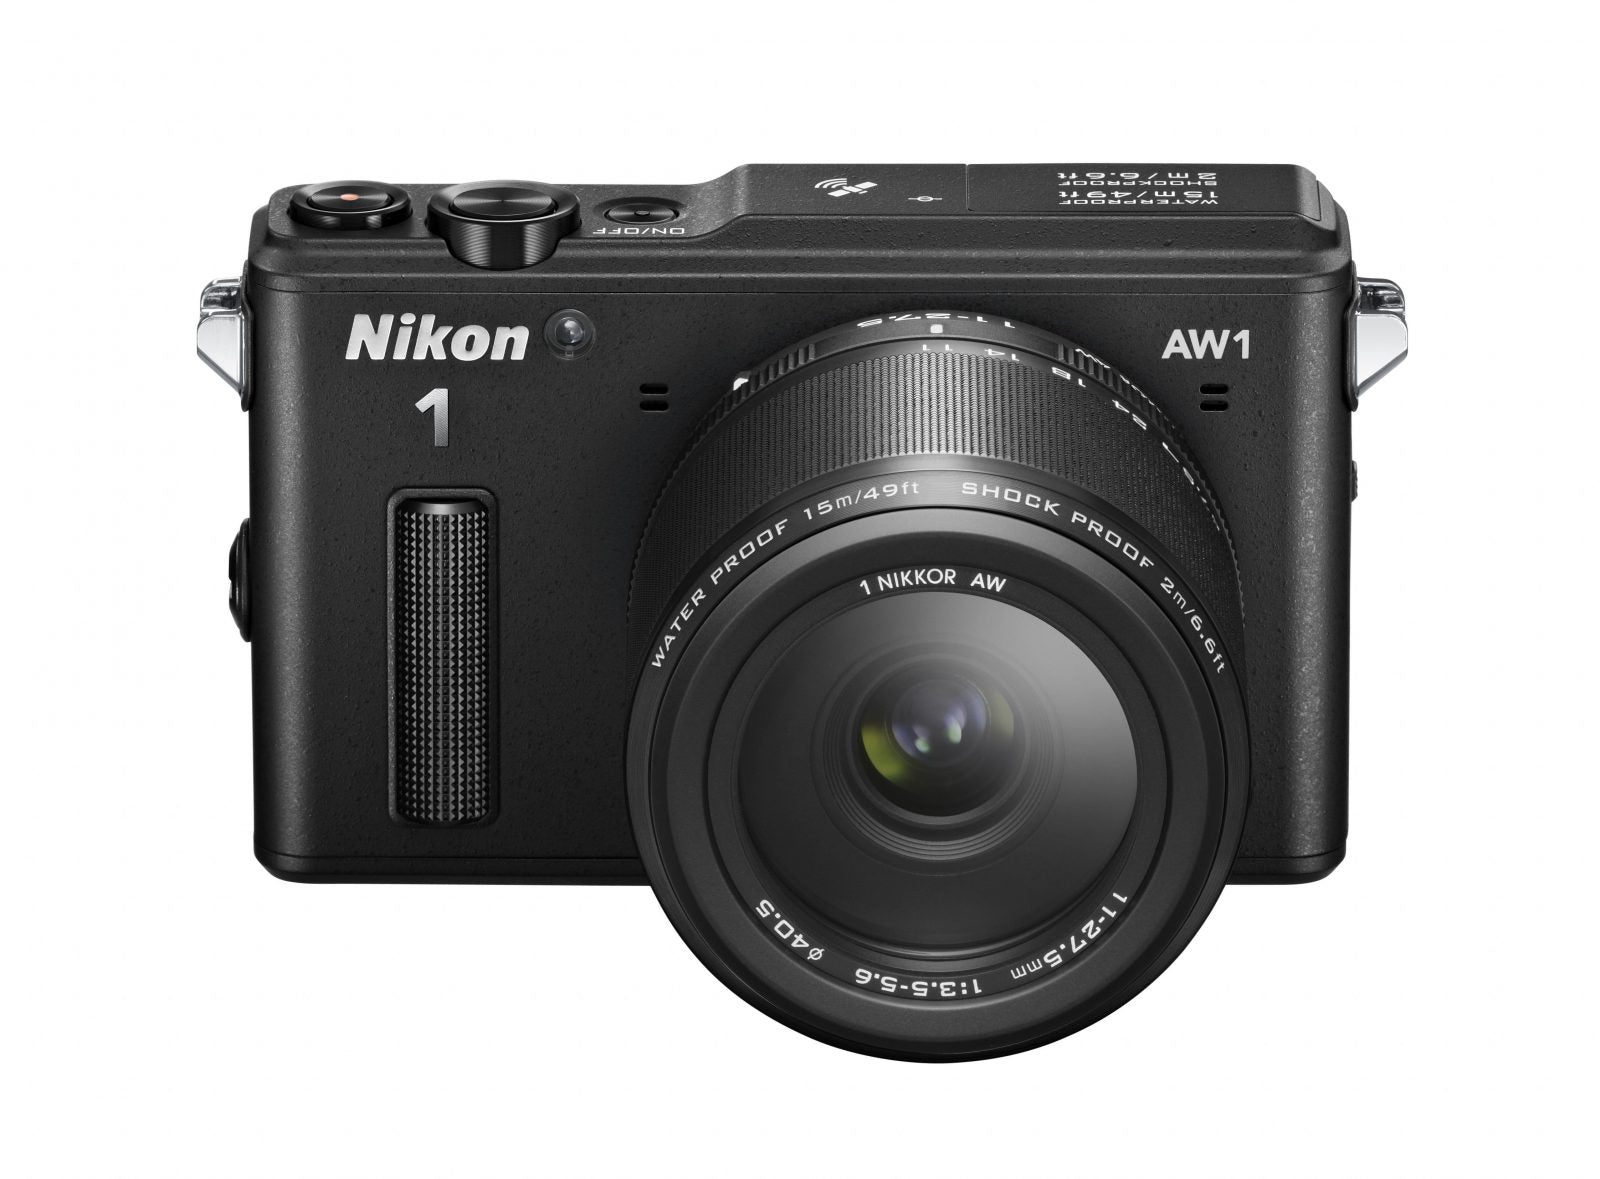 Nikon Introduces the AW1: The World's First Waterproof and Shockproof Interchangeable Lens Camera